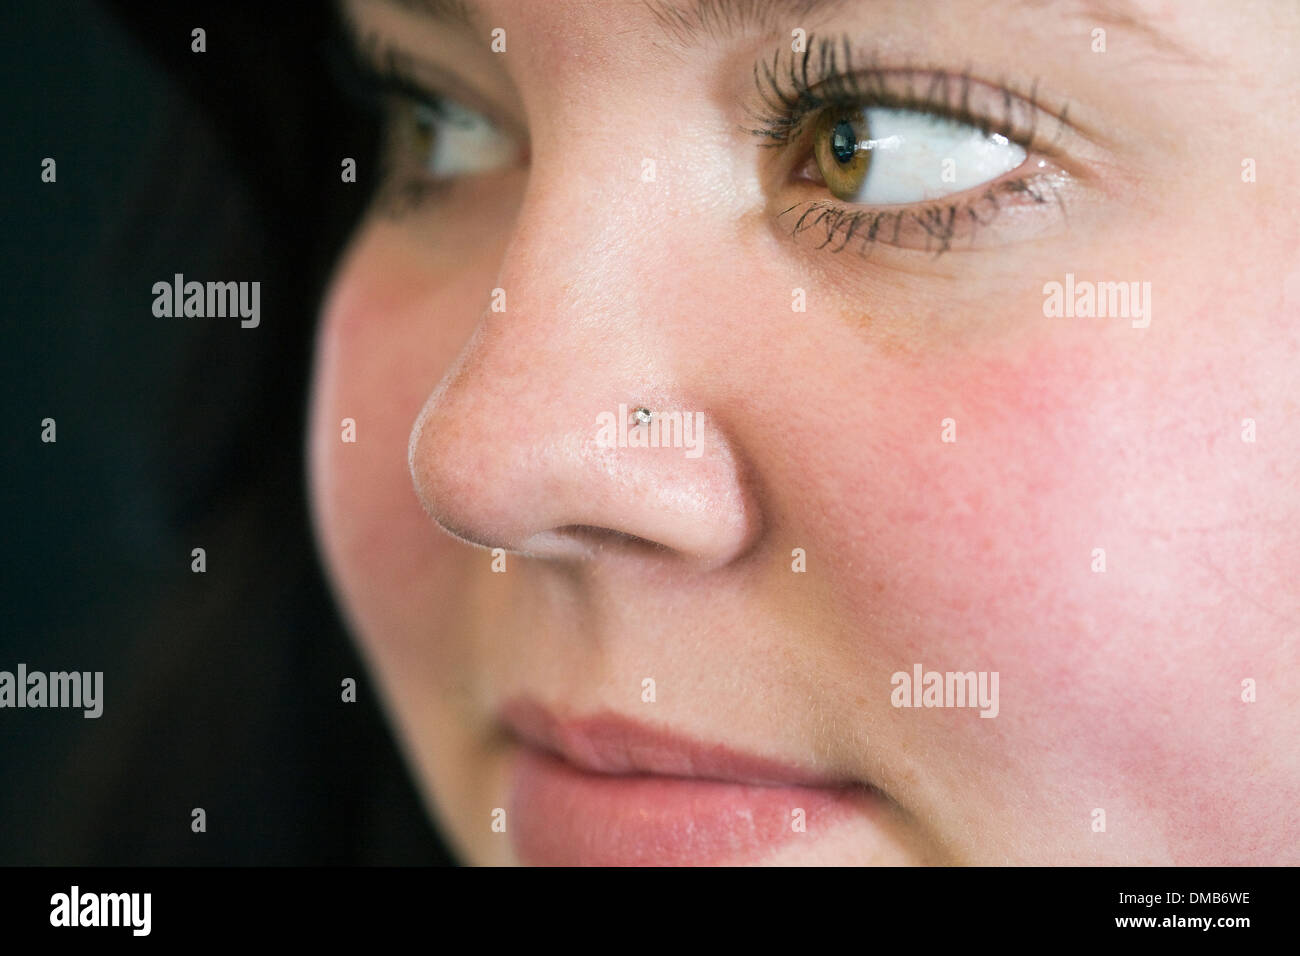 Nose Stud Stock Photos Nose Stud Stock Images Alamy within Local Nose Piercing